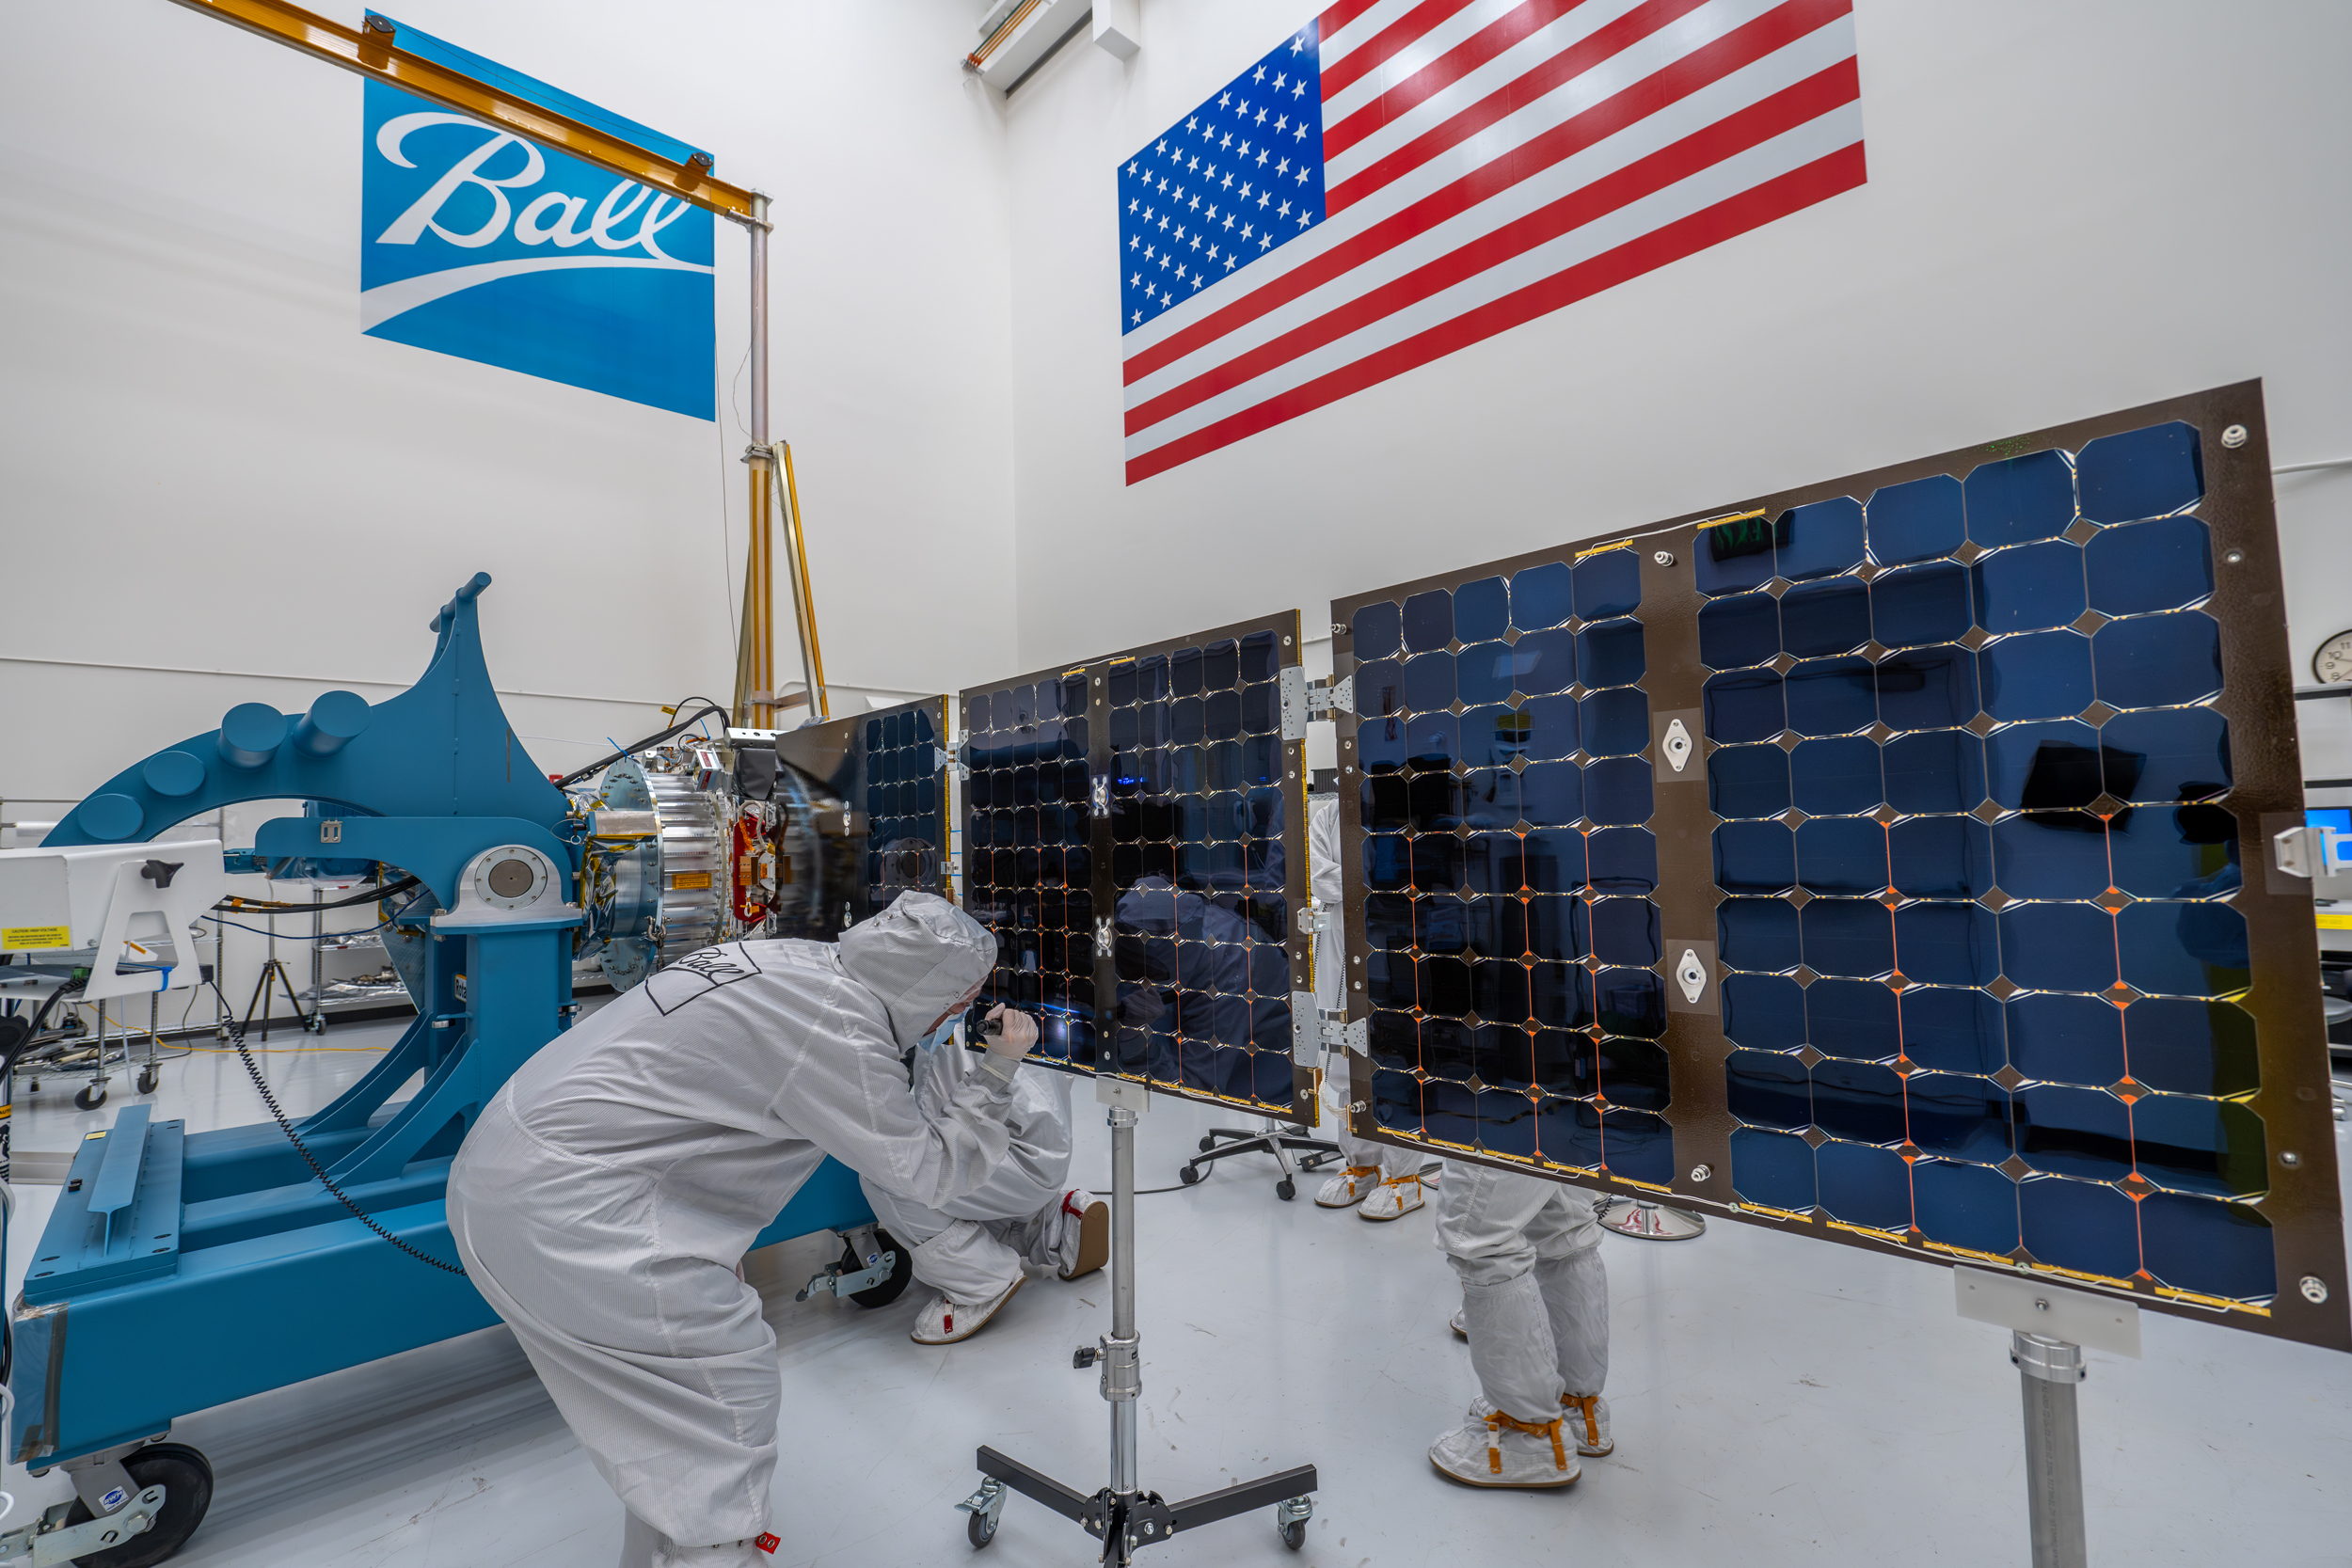 Aerospace engineers reattach MSAT’s solar panels after thermal vacuum (TVAC) testing. Credit: BAE Systems